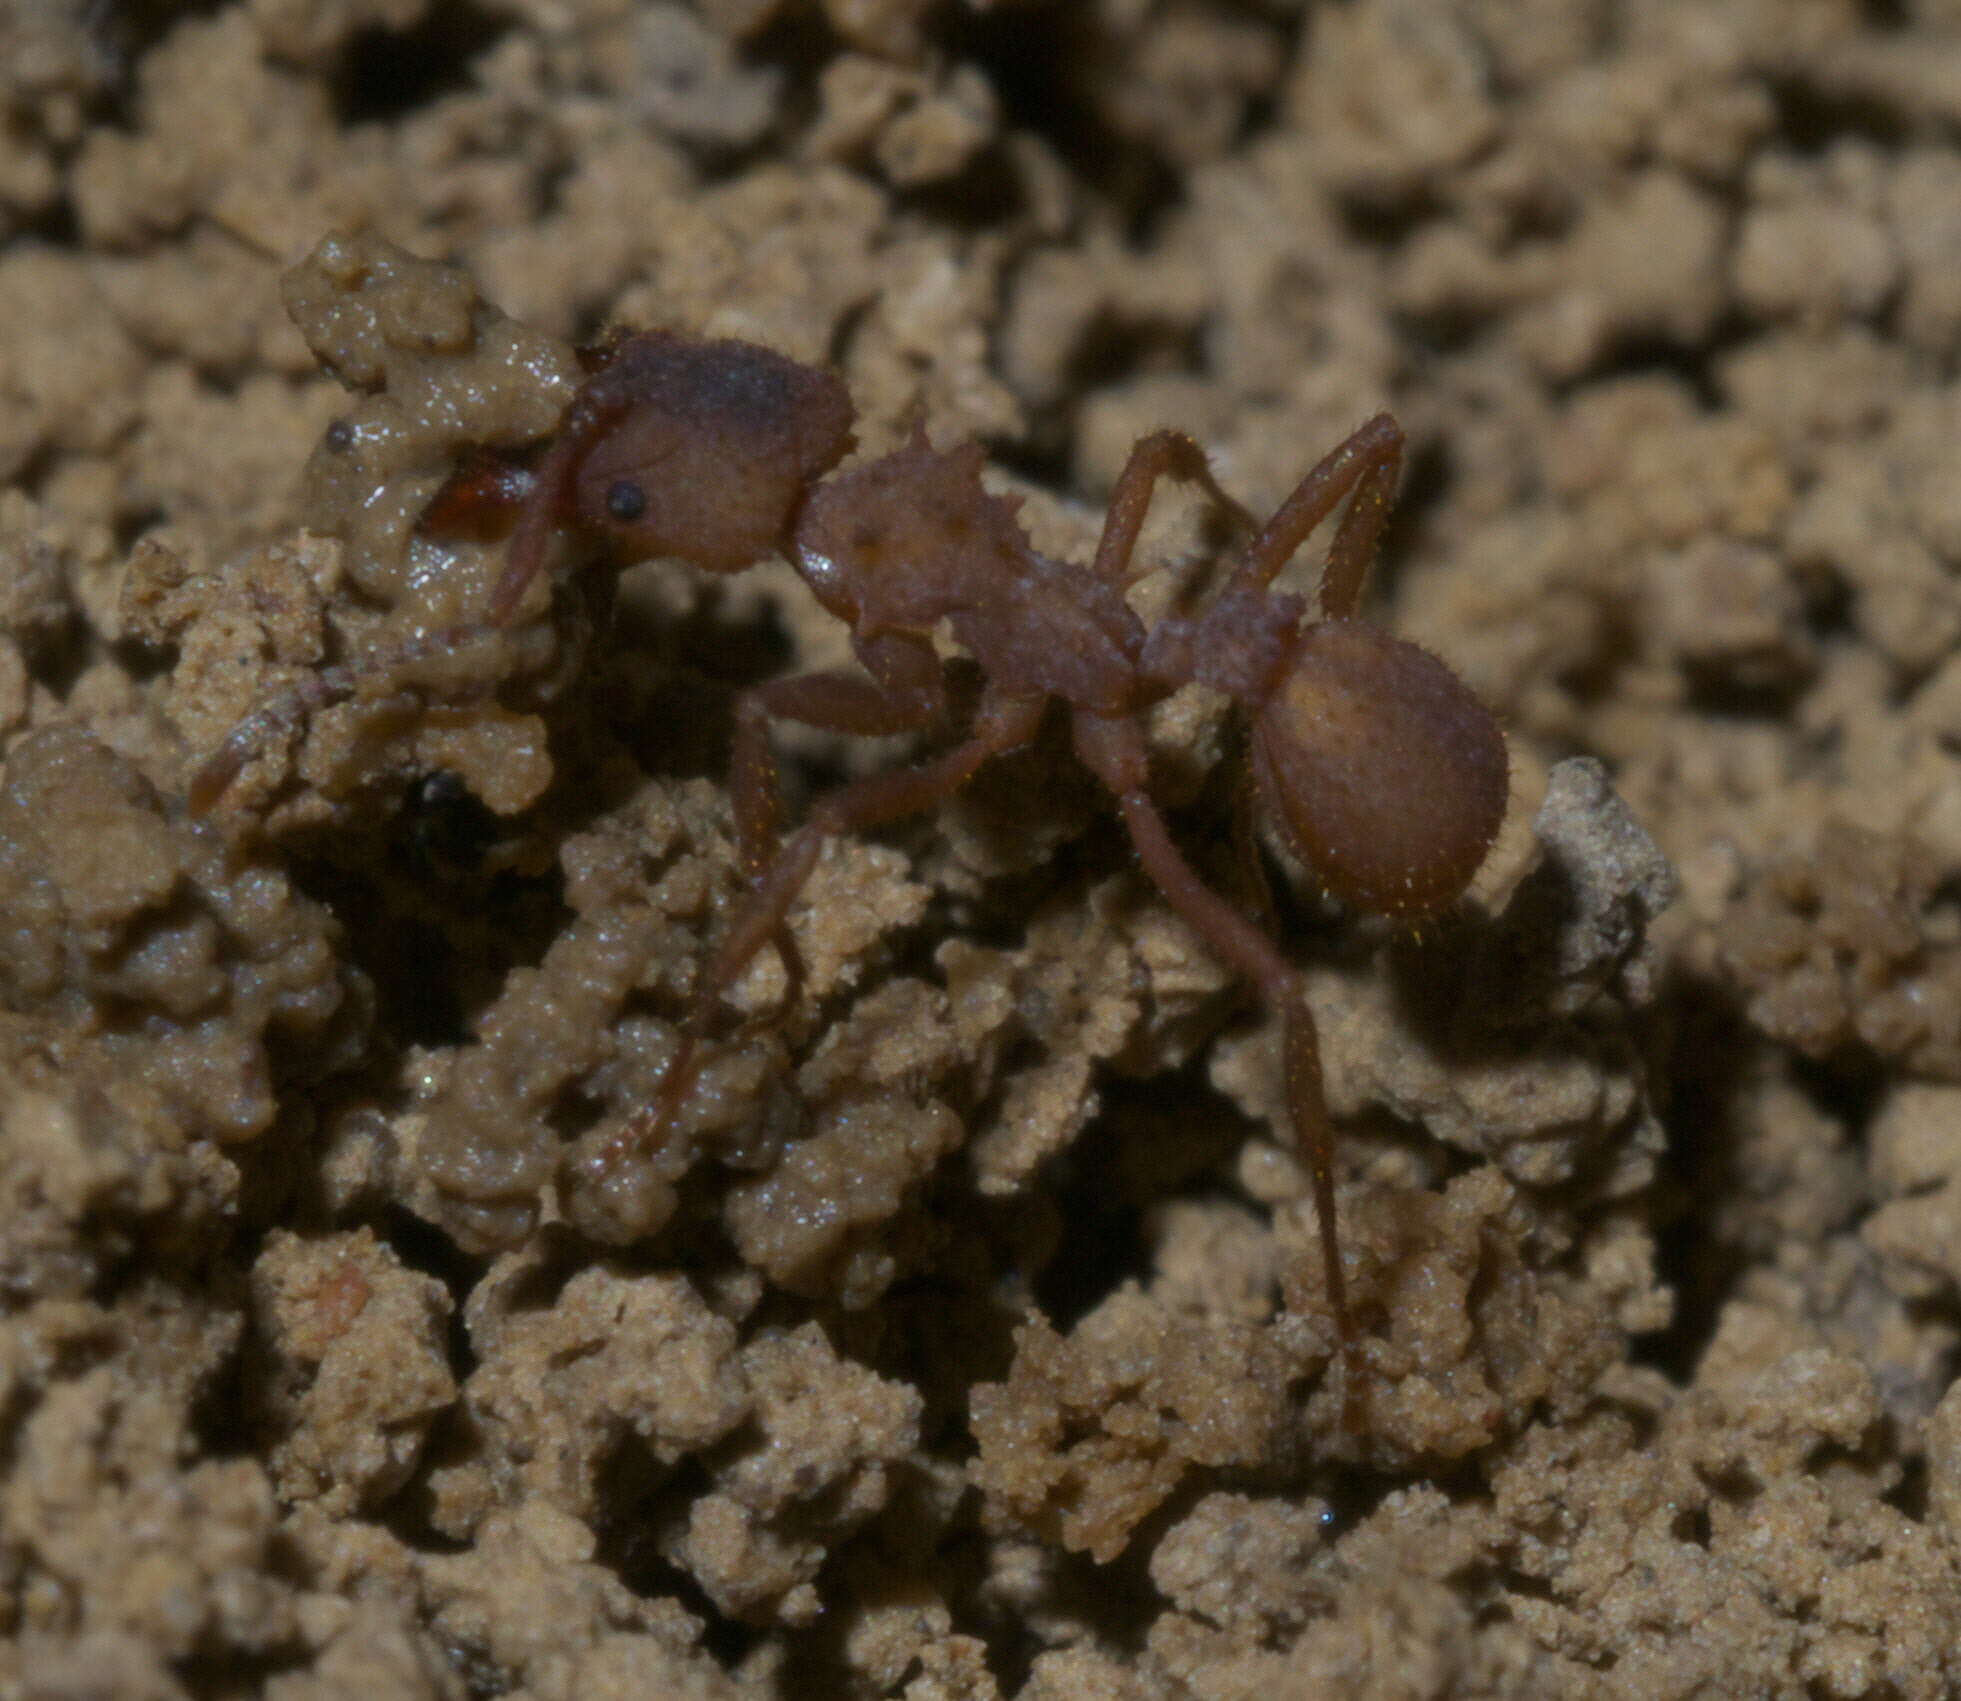 Image of Northern Fungus Farming Ant